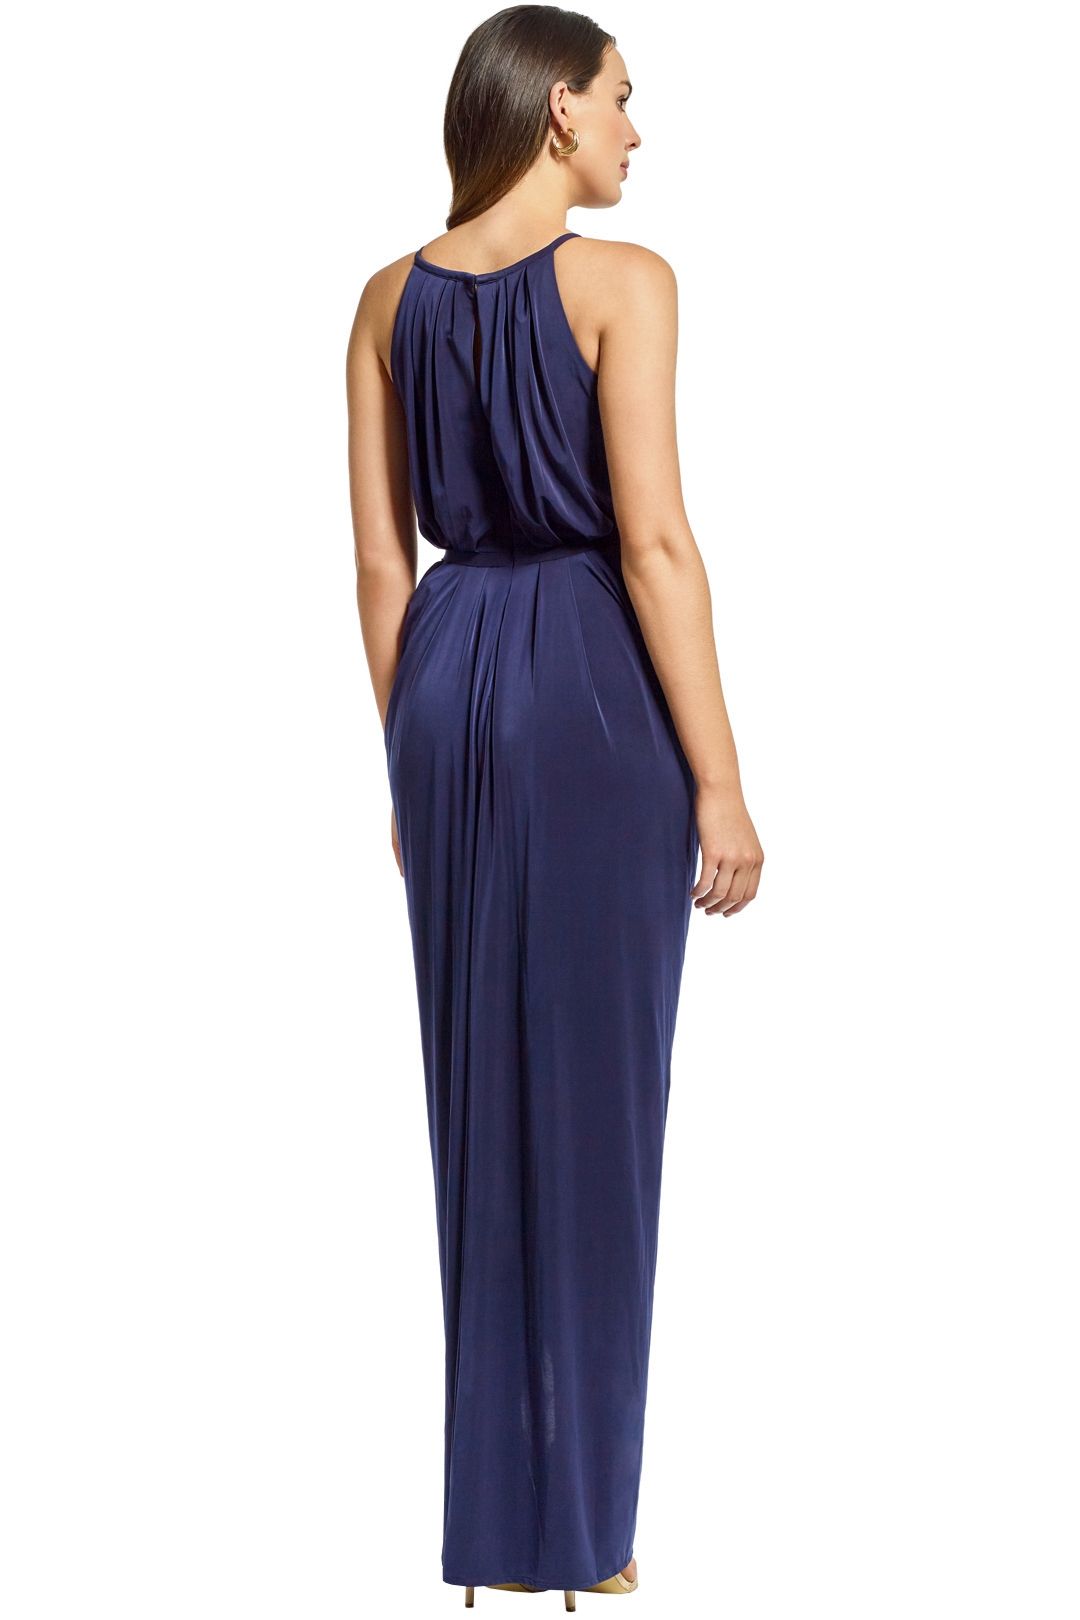 Tania Olsen - Sandra Ruched Gown - Navy - Back